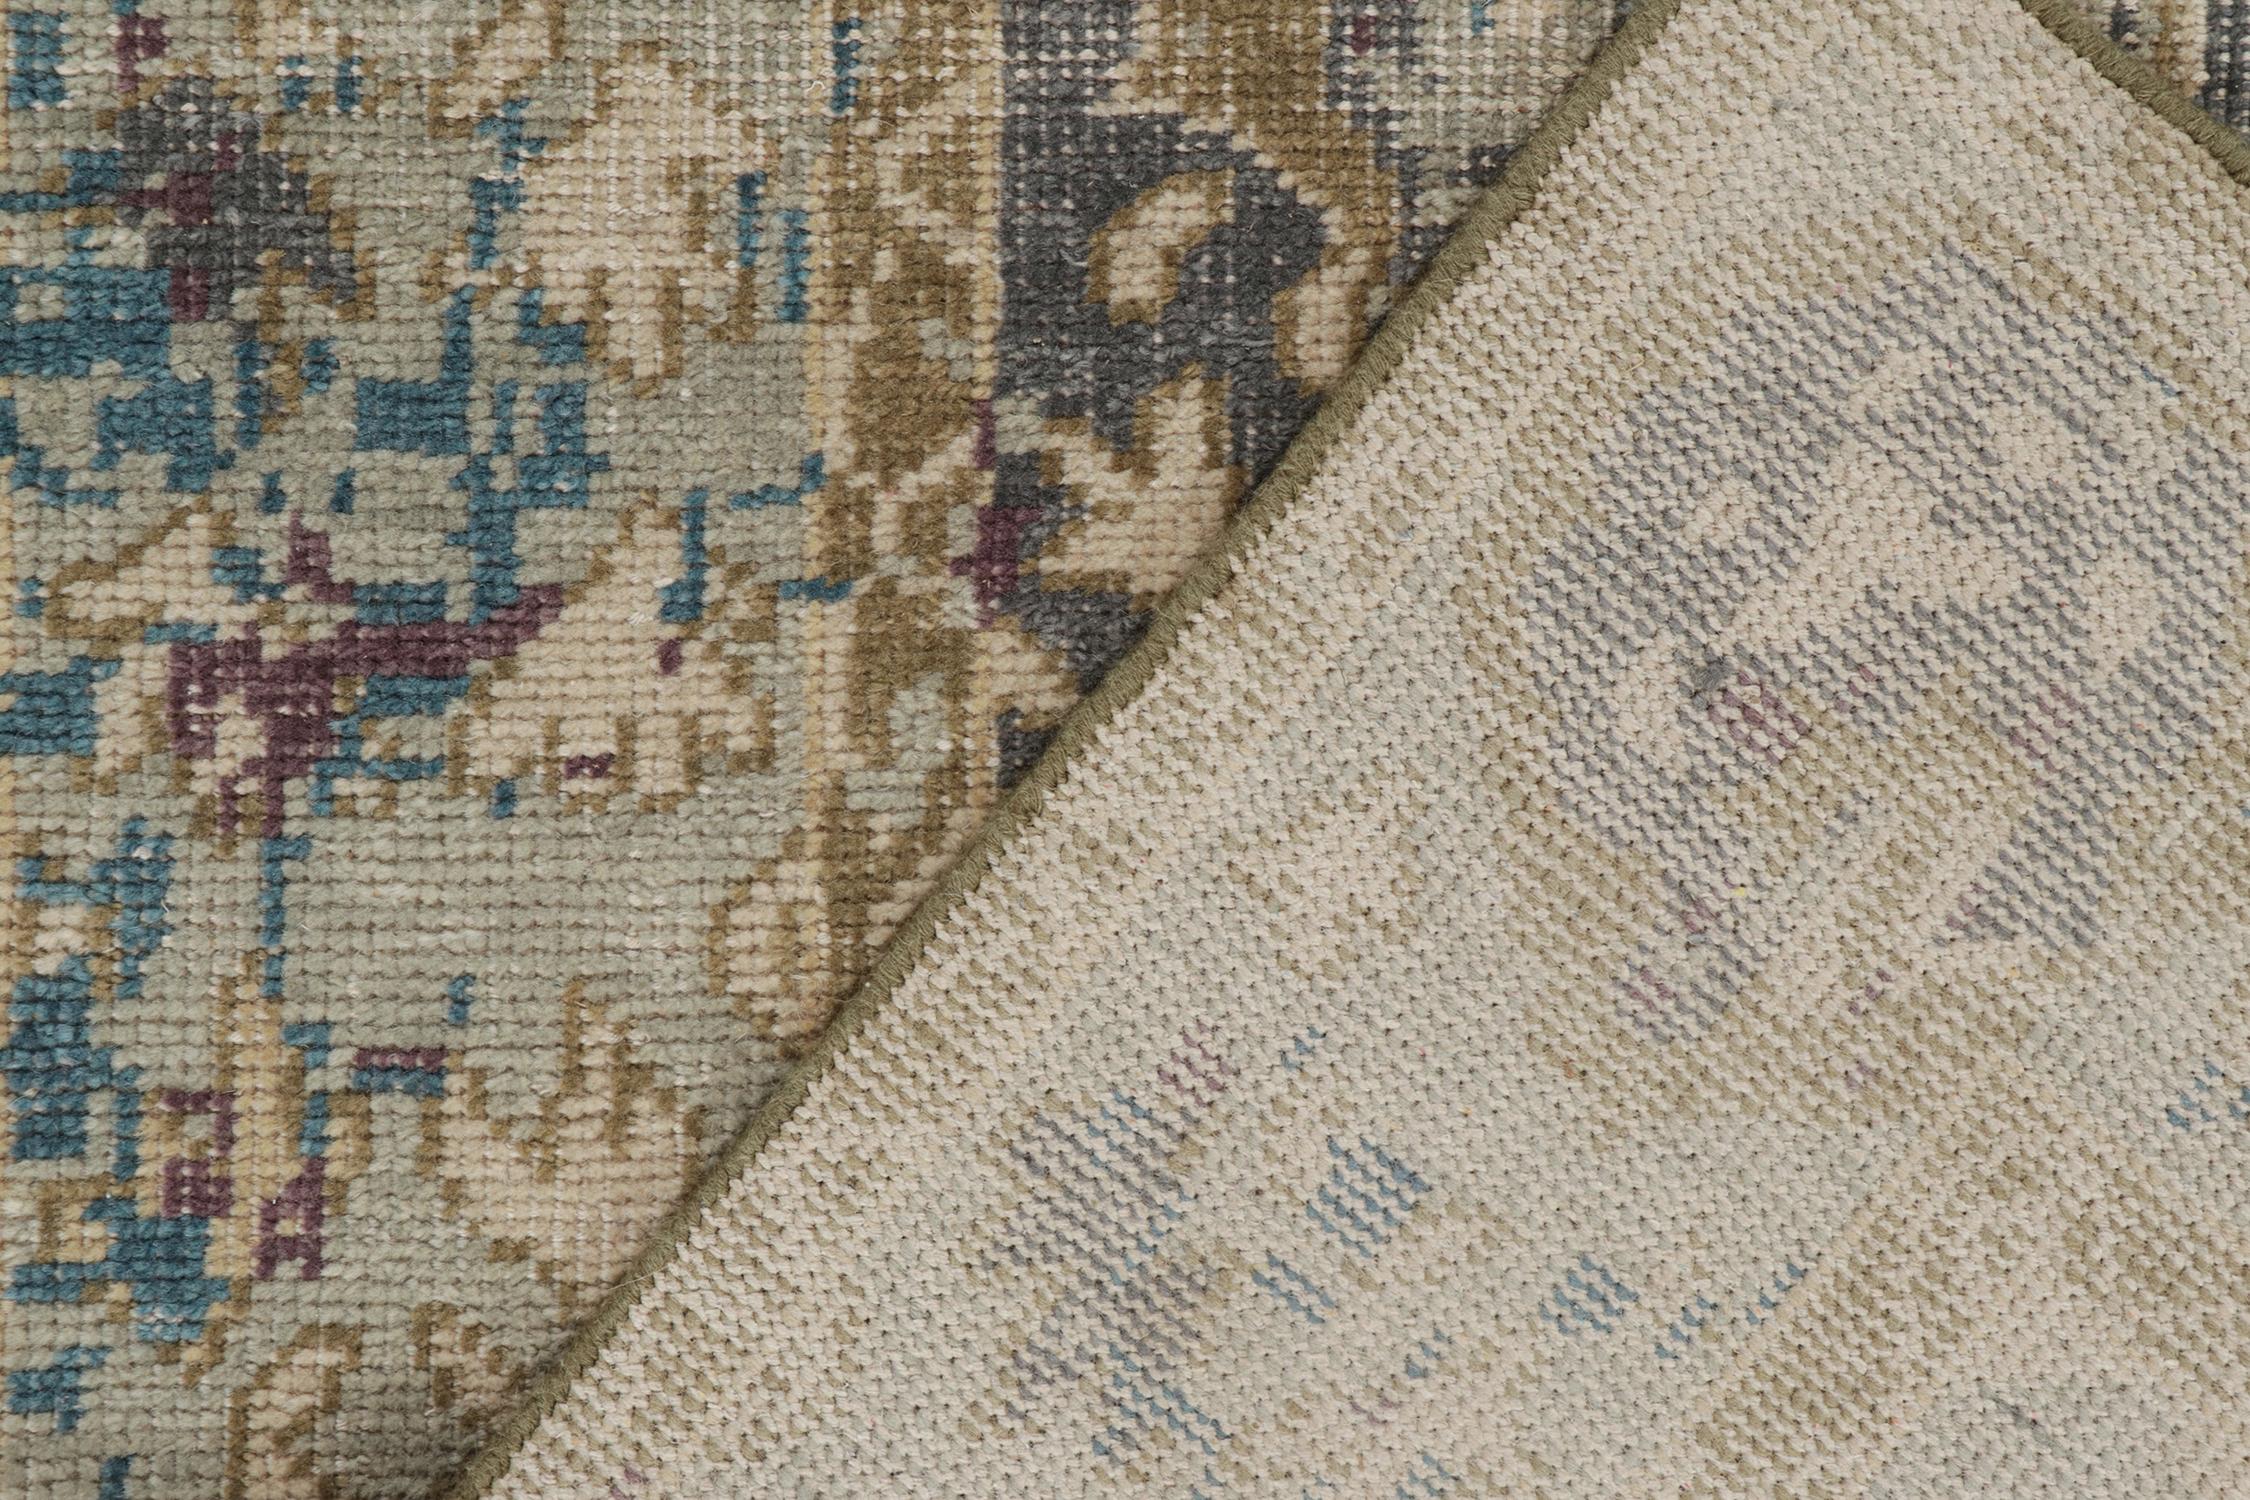 Rug & Kilim's Distressed Classic Style Teppich mit eisblauem Medaillon-Muster (Wolle) im Angebot